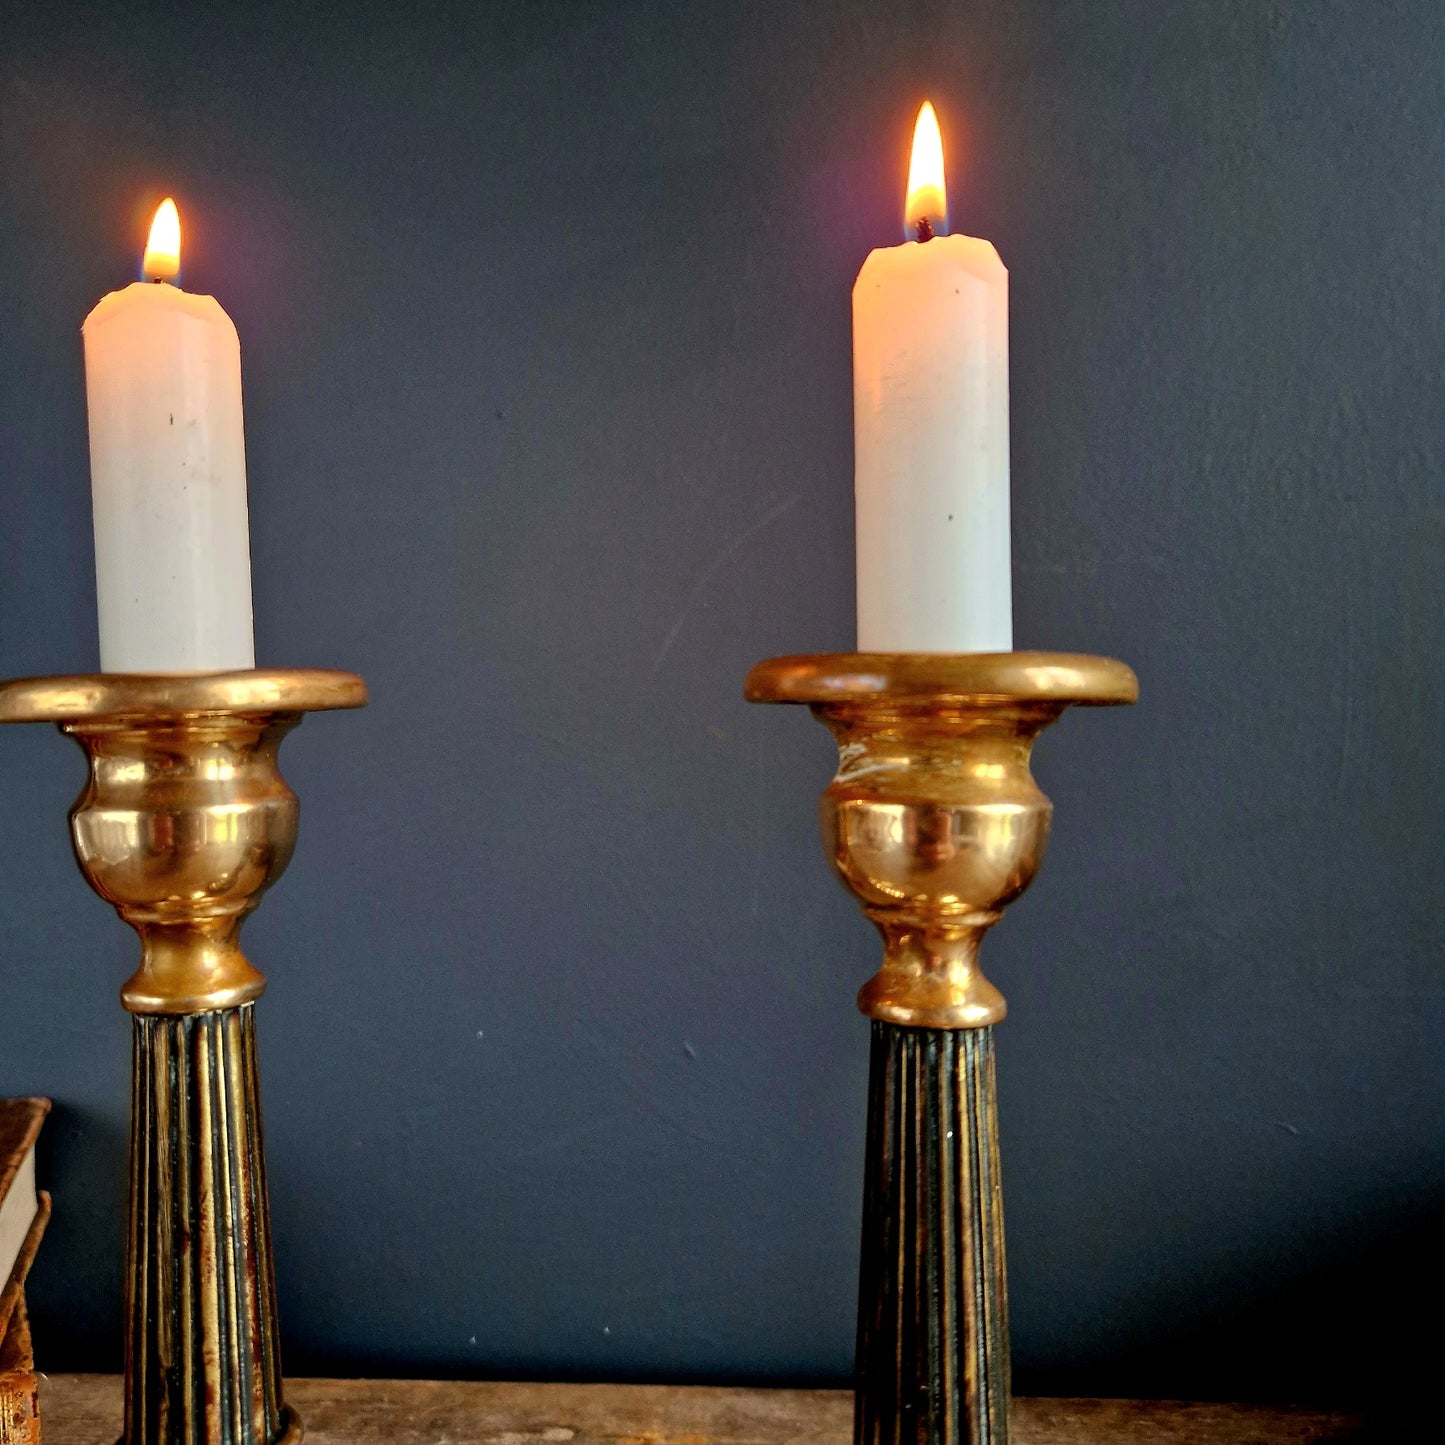 French antique candle holders. French 19th century candlesticks.